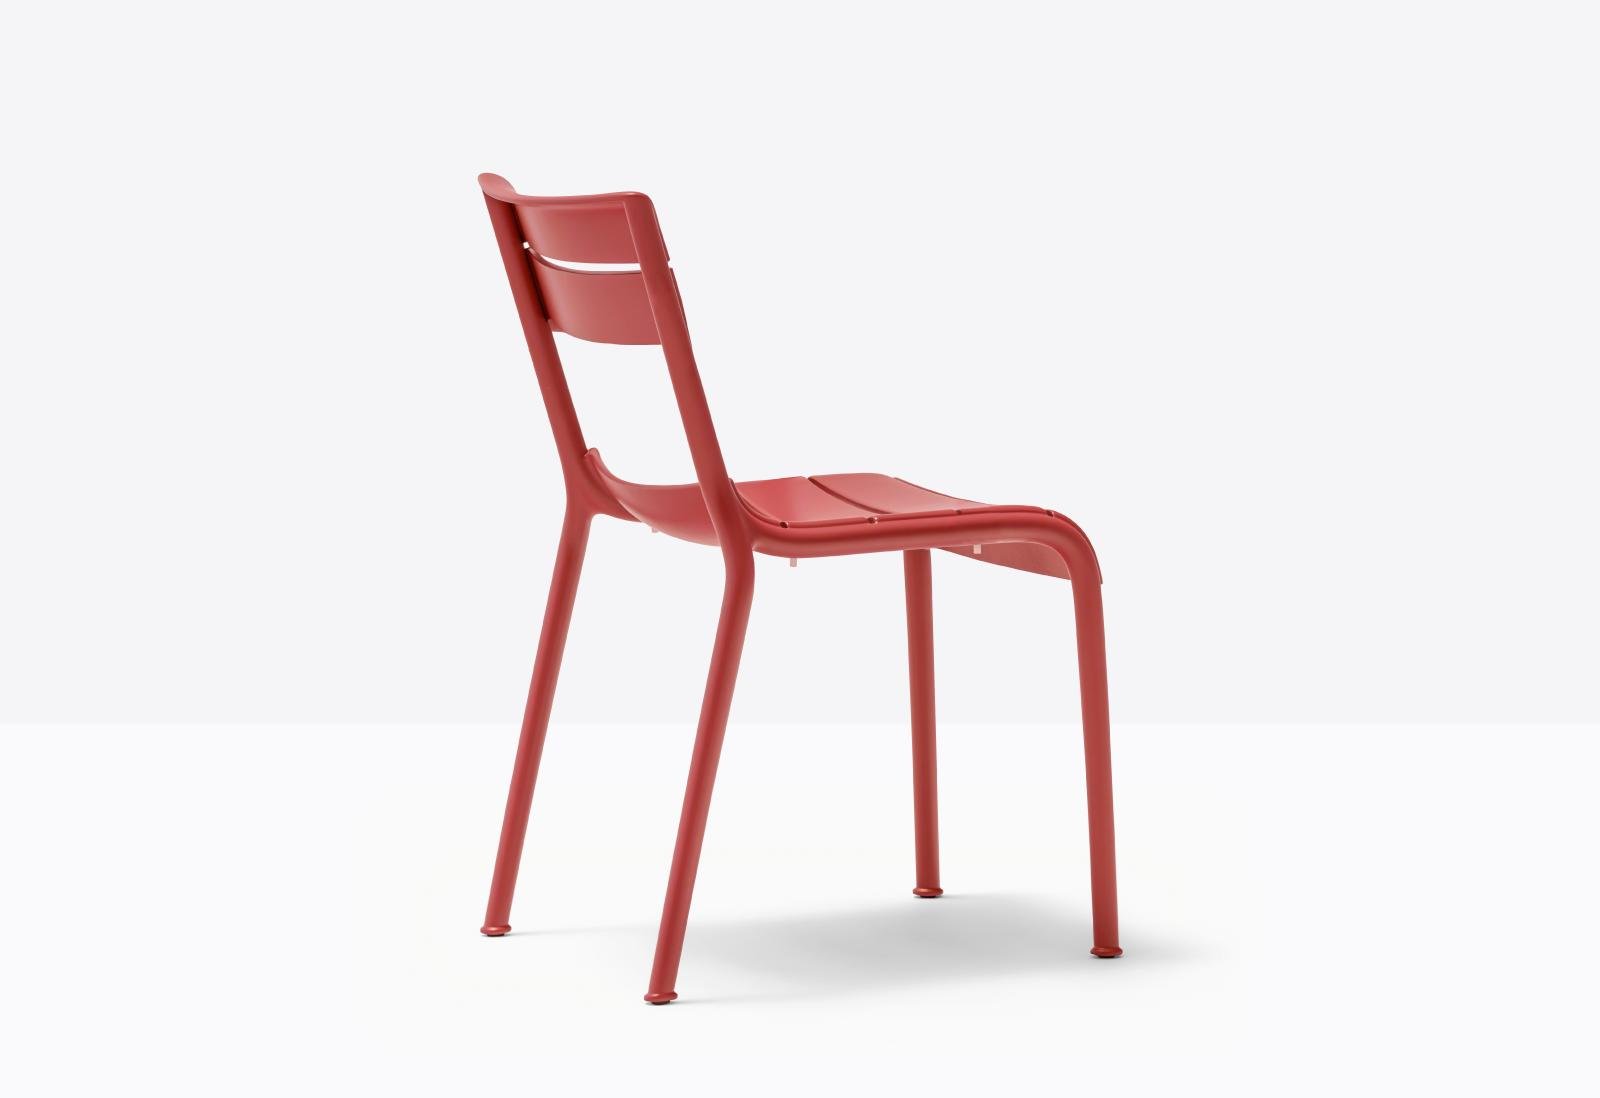 Souvenir Chair from Pedrali, designed by Eugeni Quitllet